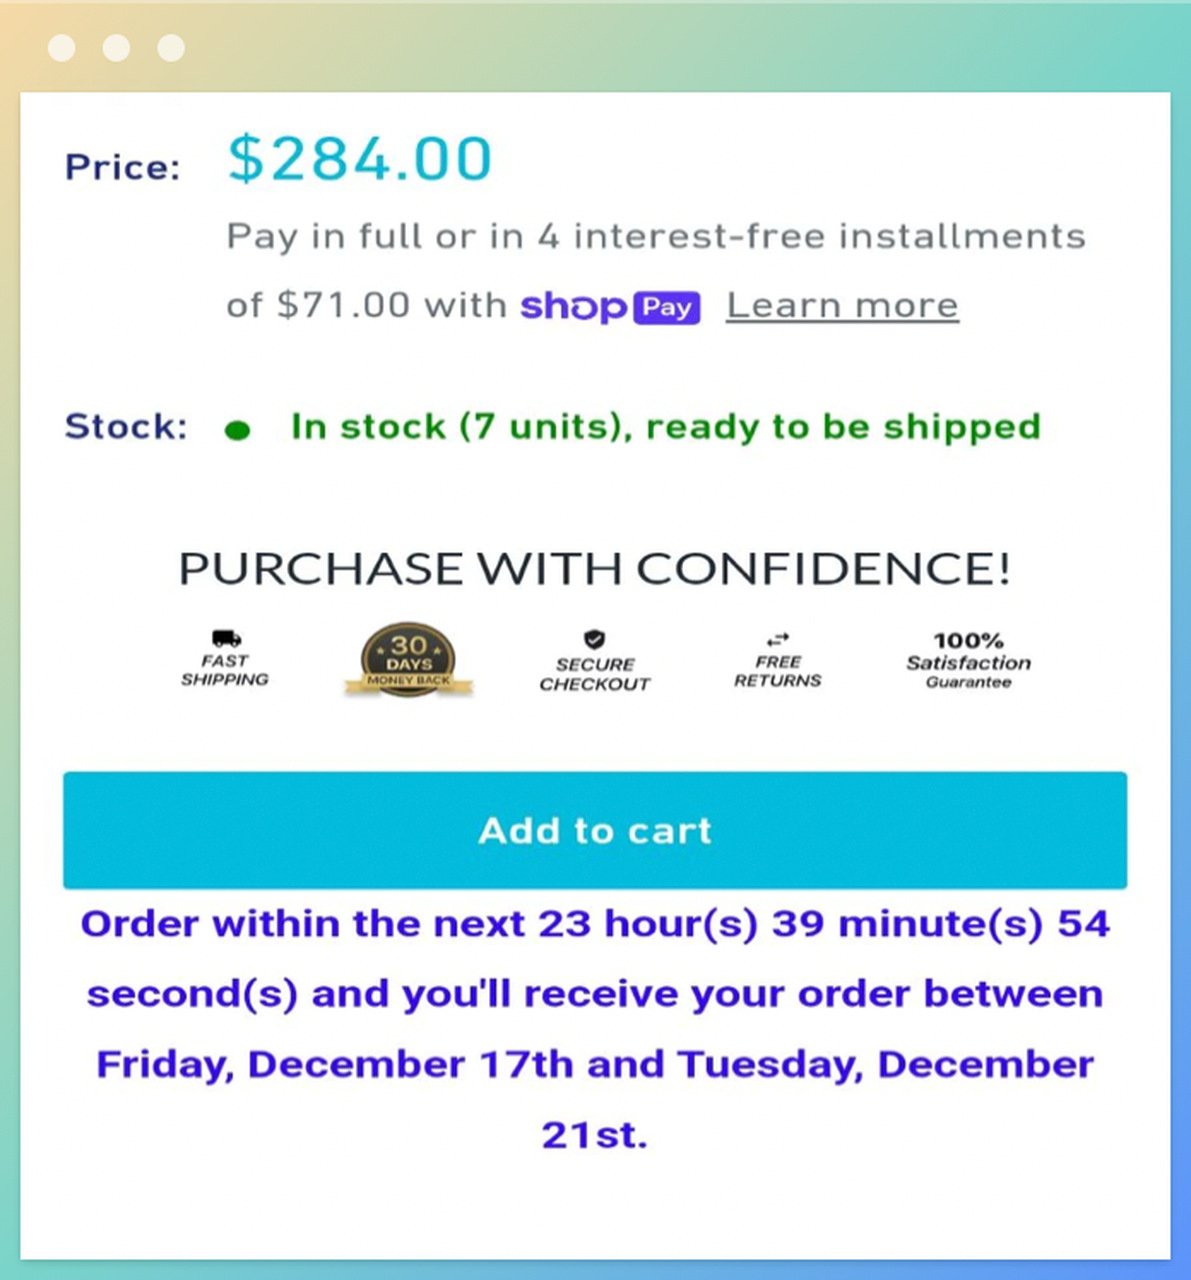 When to Expect Order Delivery by Boost Hub Business Solutions' product page showing the price, stock info, add to cart button and estimated delivery time